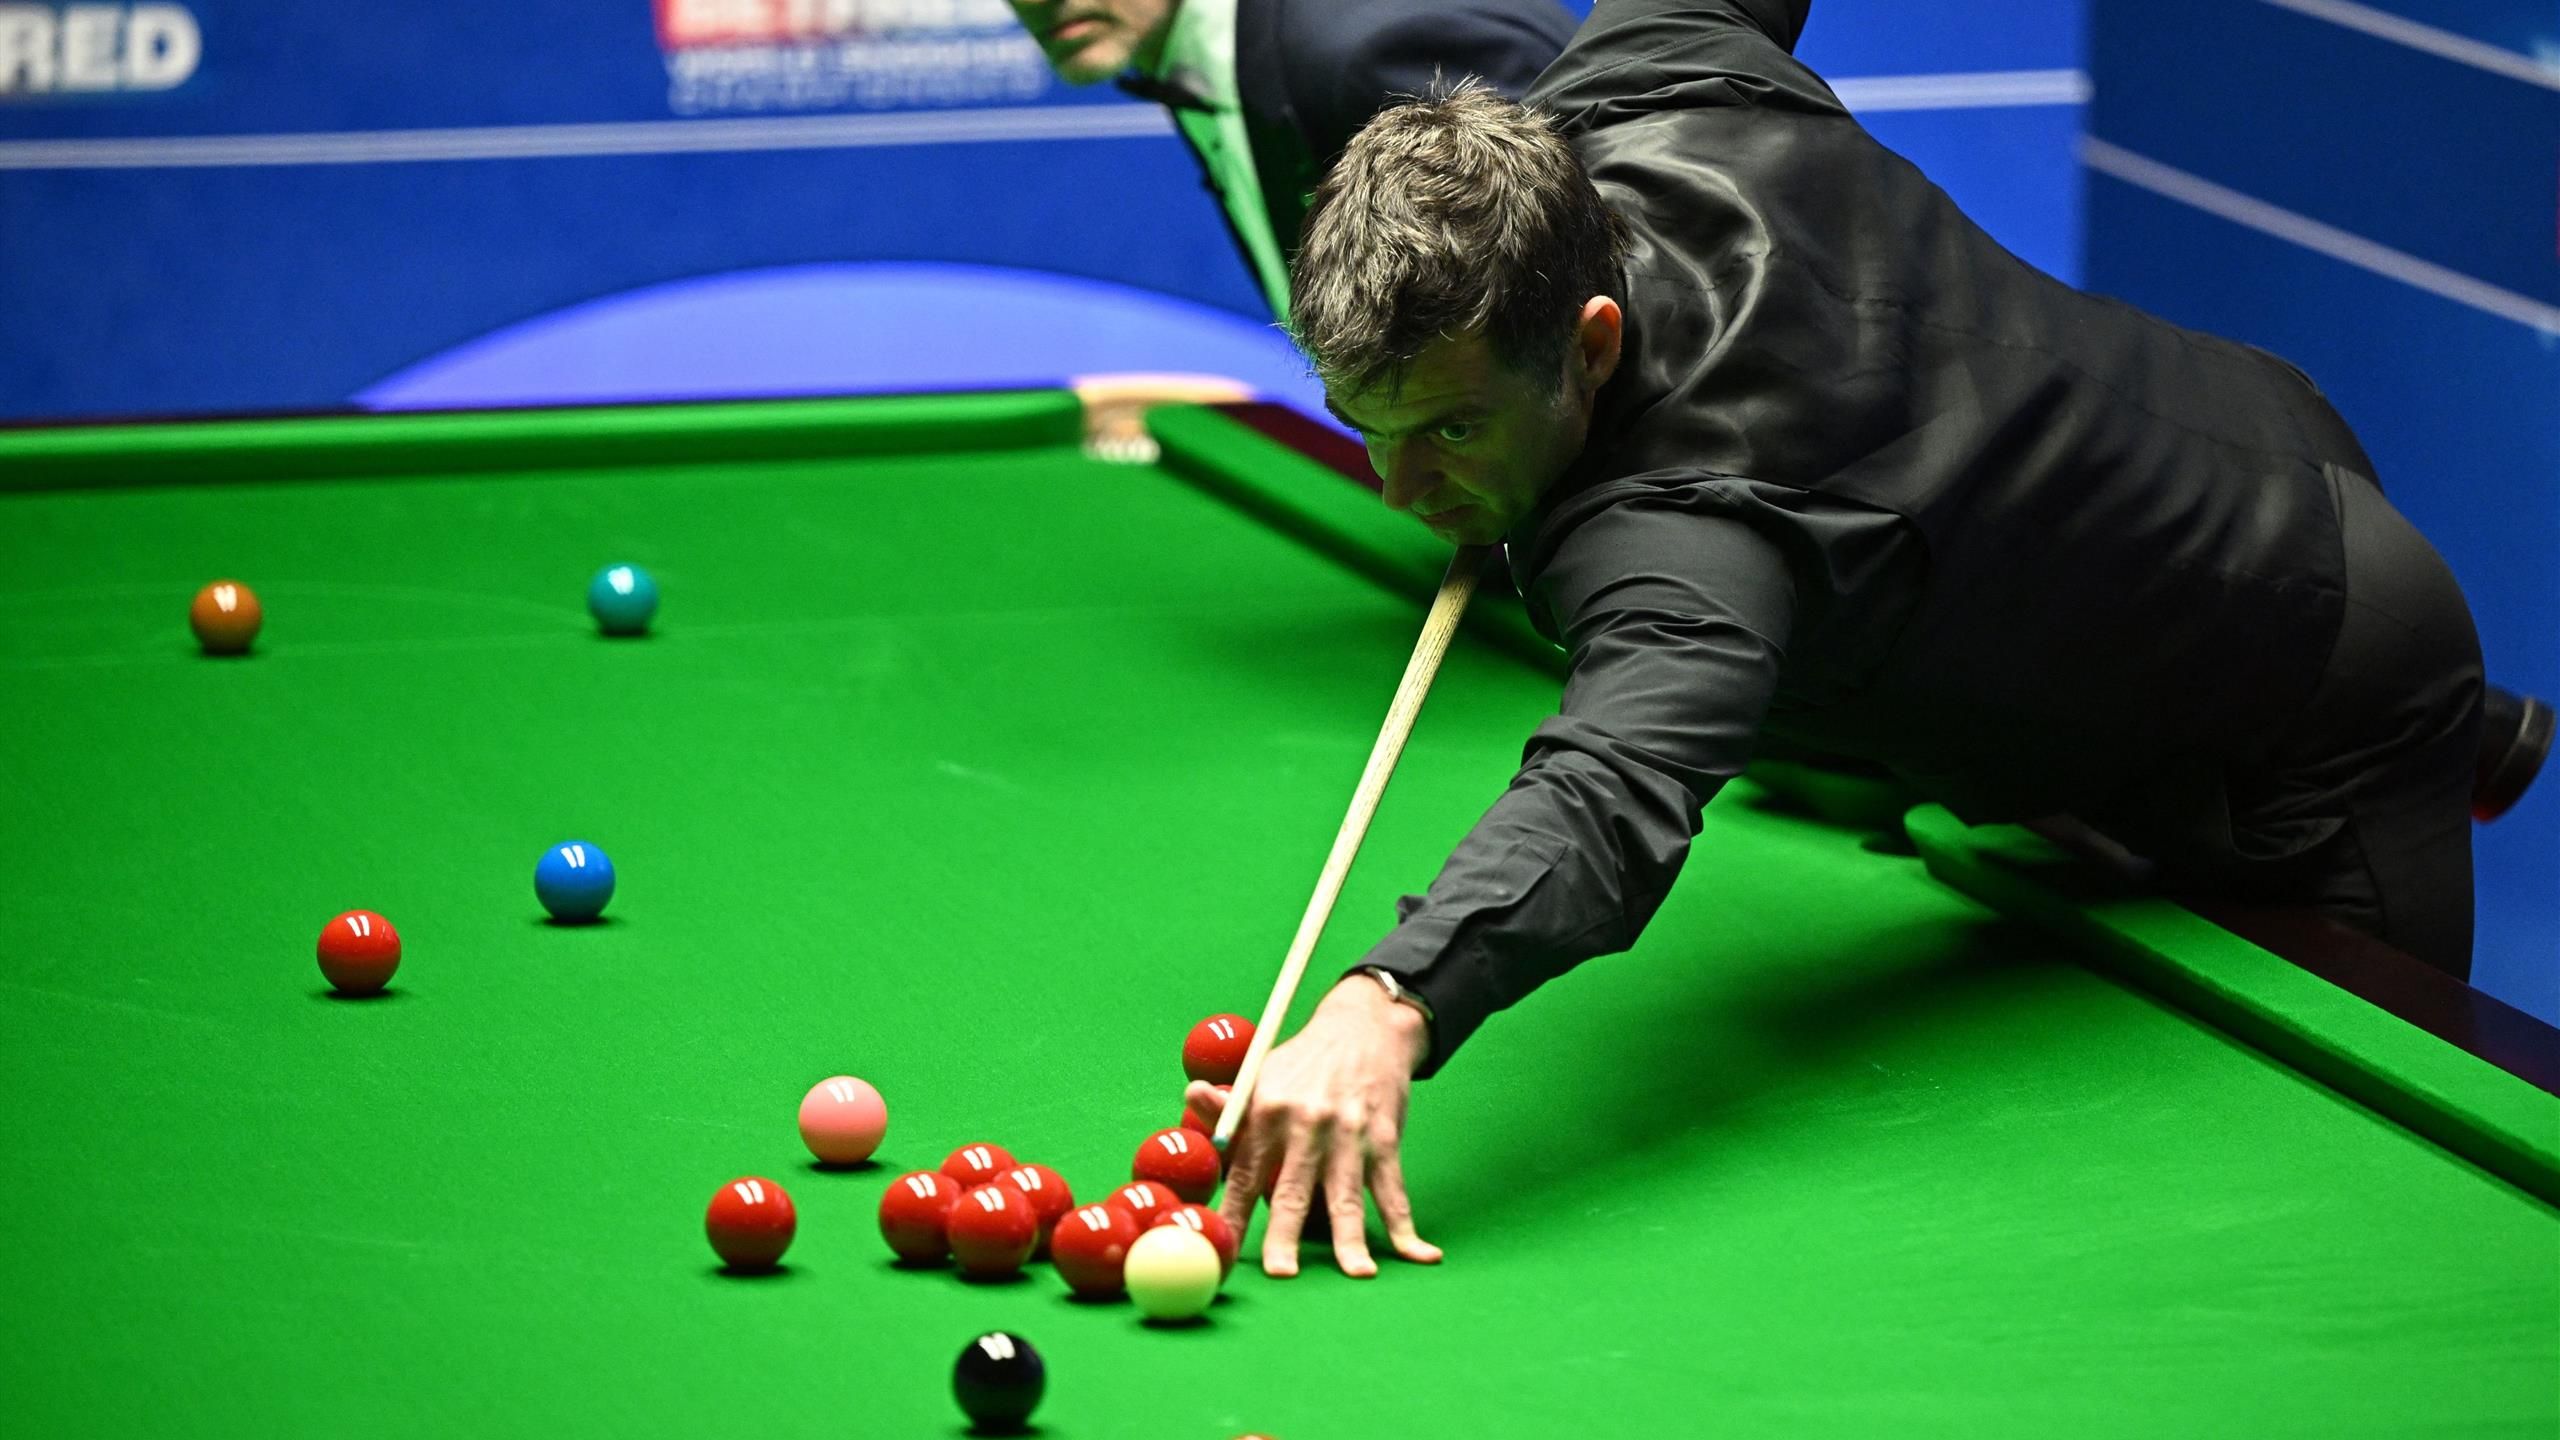 2022/23 snooker calendar after World Mixed Doubles and Tour Championship updates